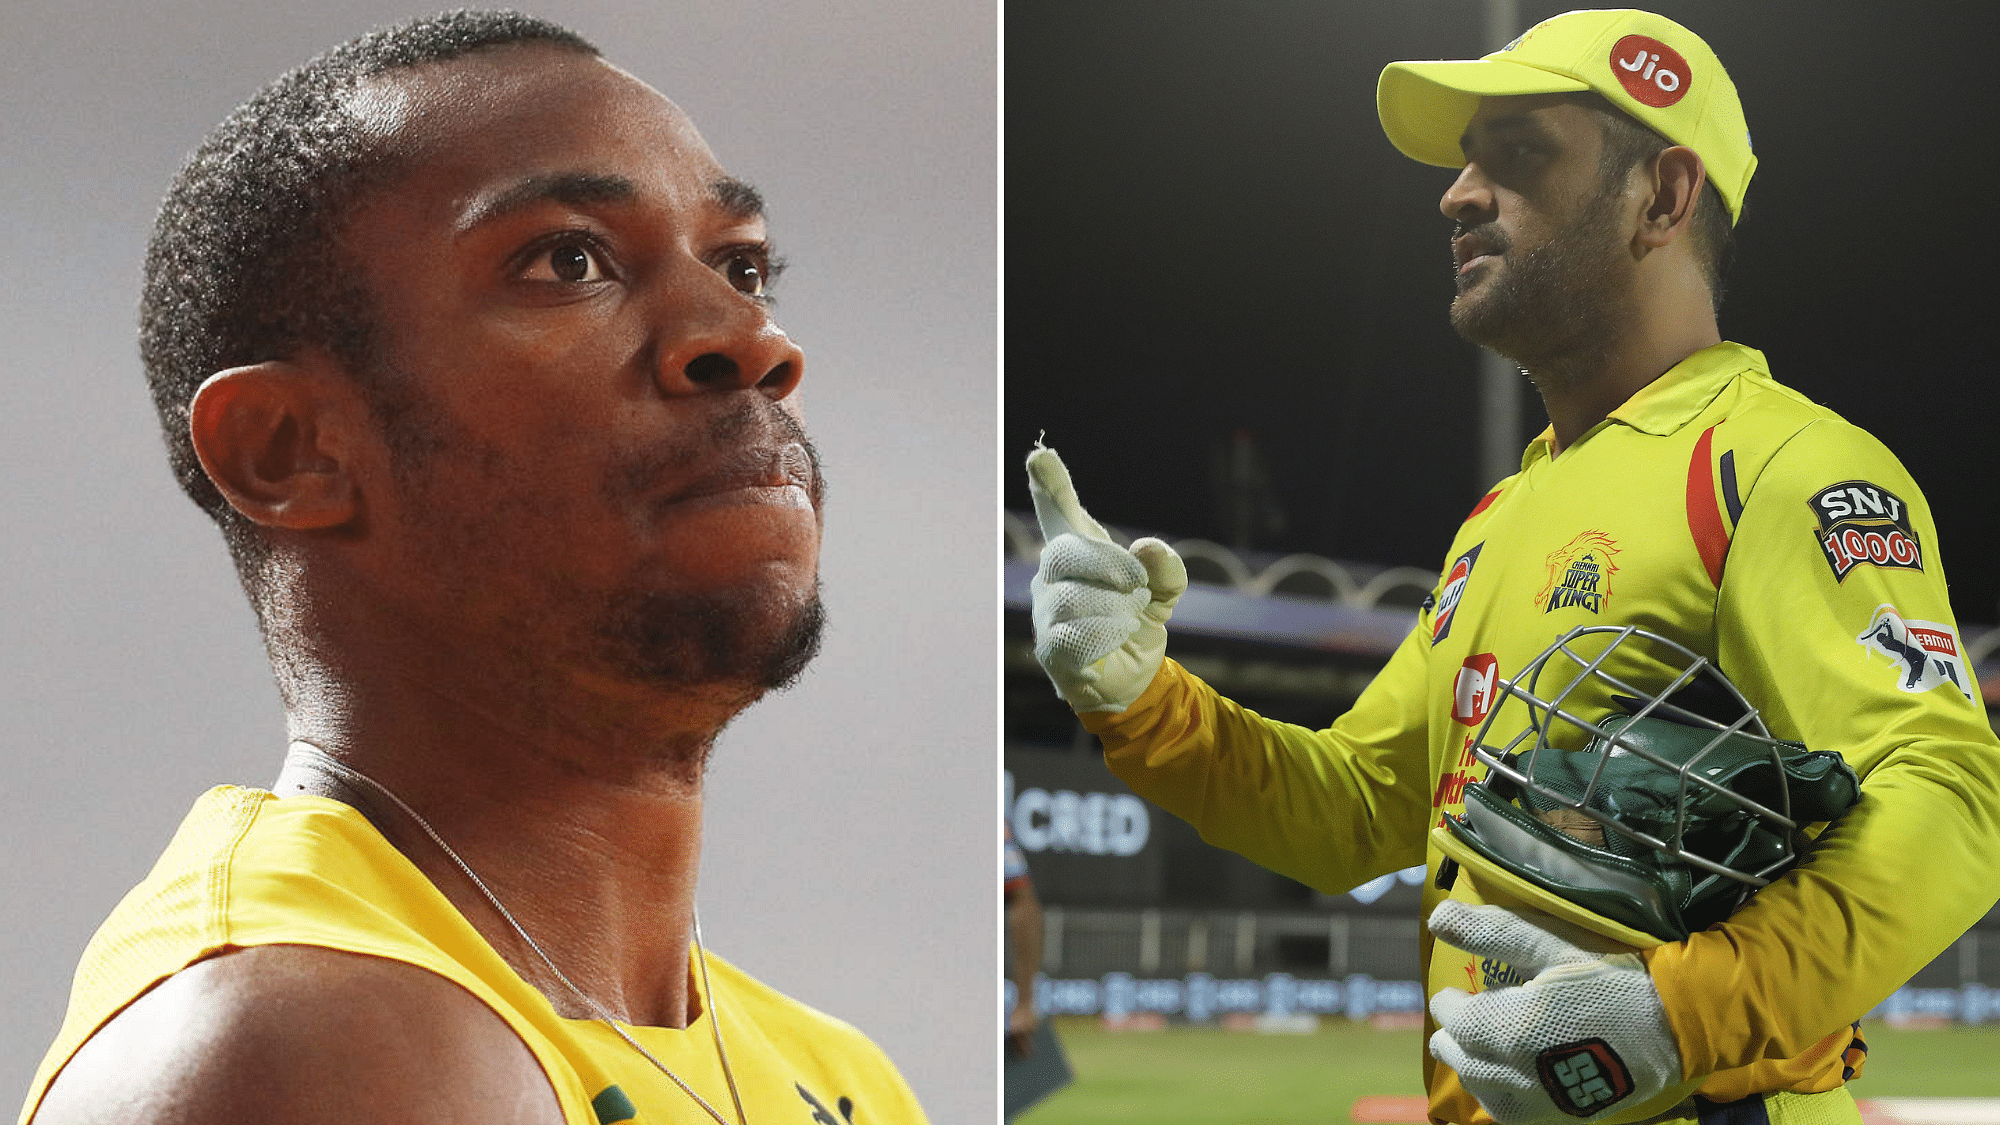 Jamaican sprinter criticized Dhoni for bowling Jadeja in the last over and wondered where was Dwayne Bravo